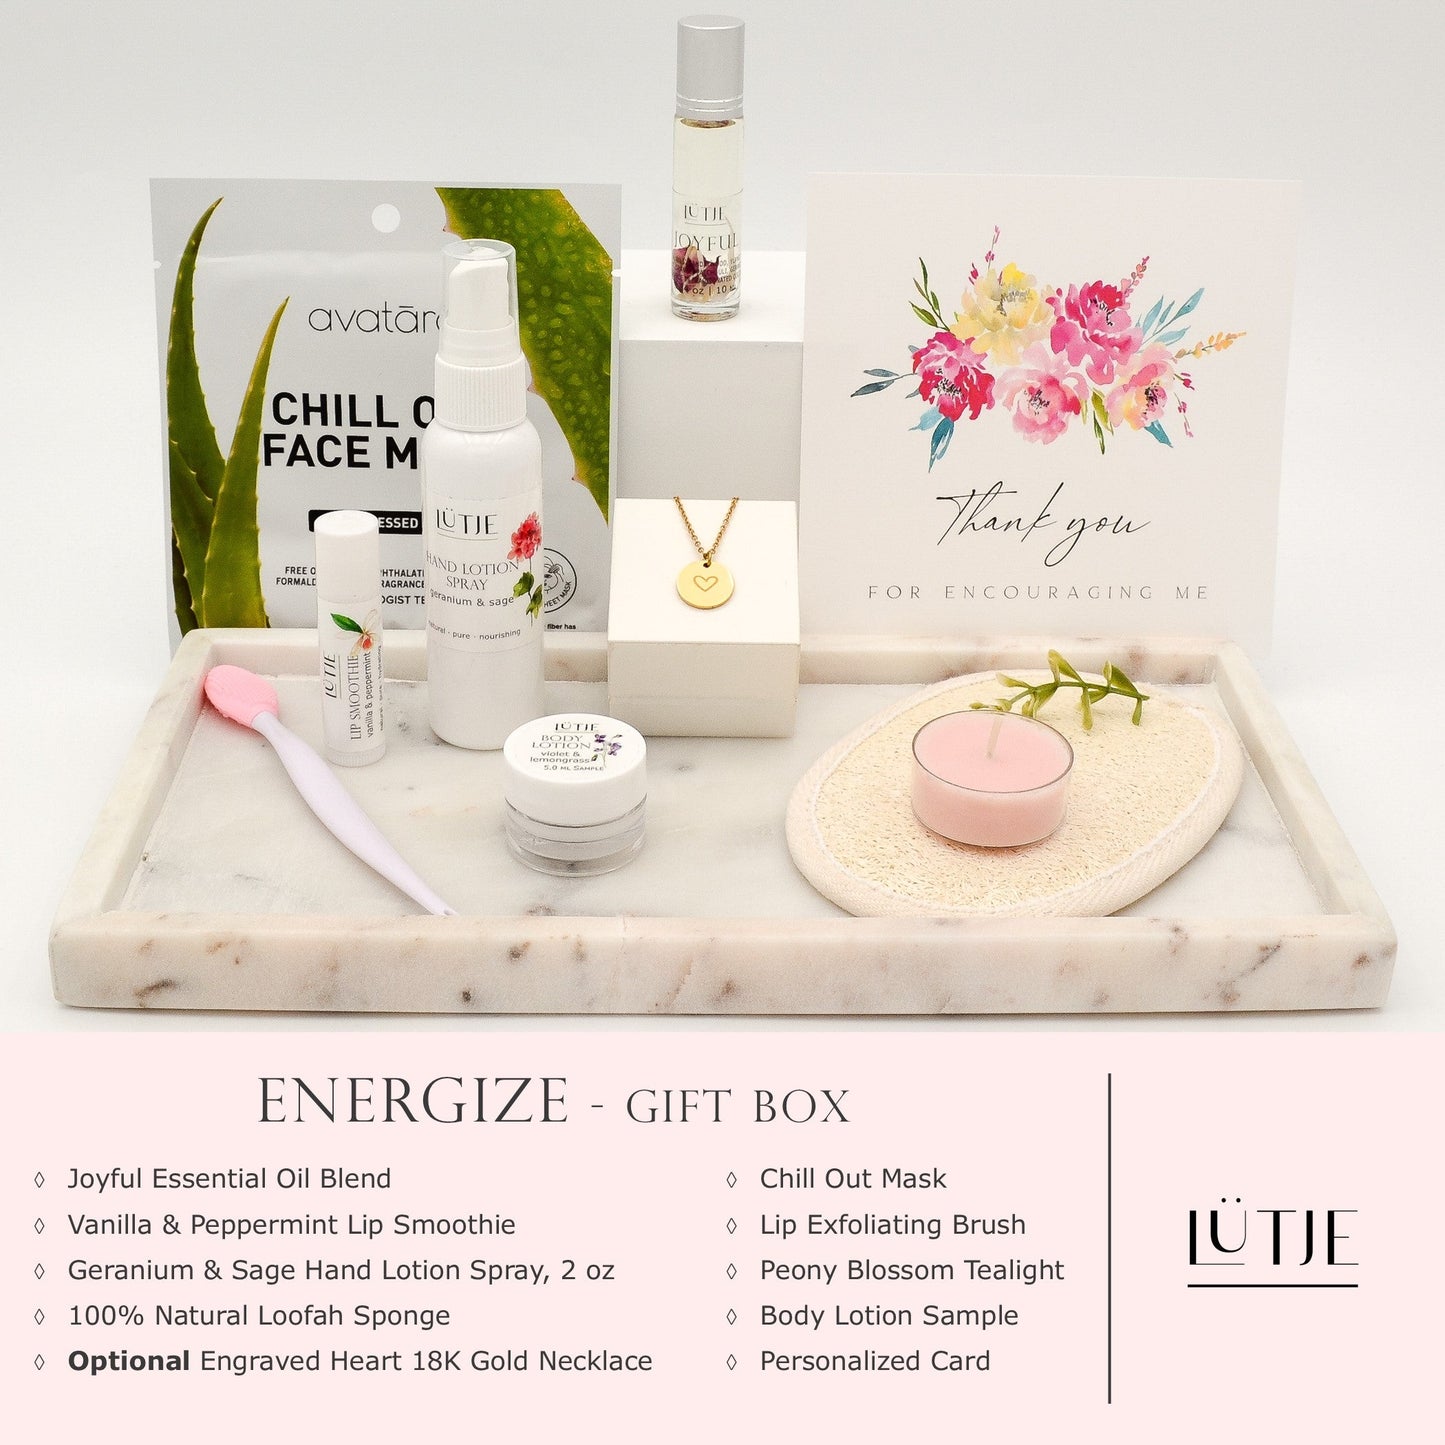 Energize Gift Box for women, BFF, wife, daughter, sister, mom, or grandma, includes Geranium & Sage hand lotion spray, essential oil, lip balm, hydrating face mask, other bath, spa and self-care items, and 18K gold-plated necklace with engraved heart.